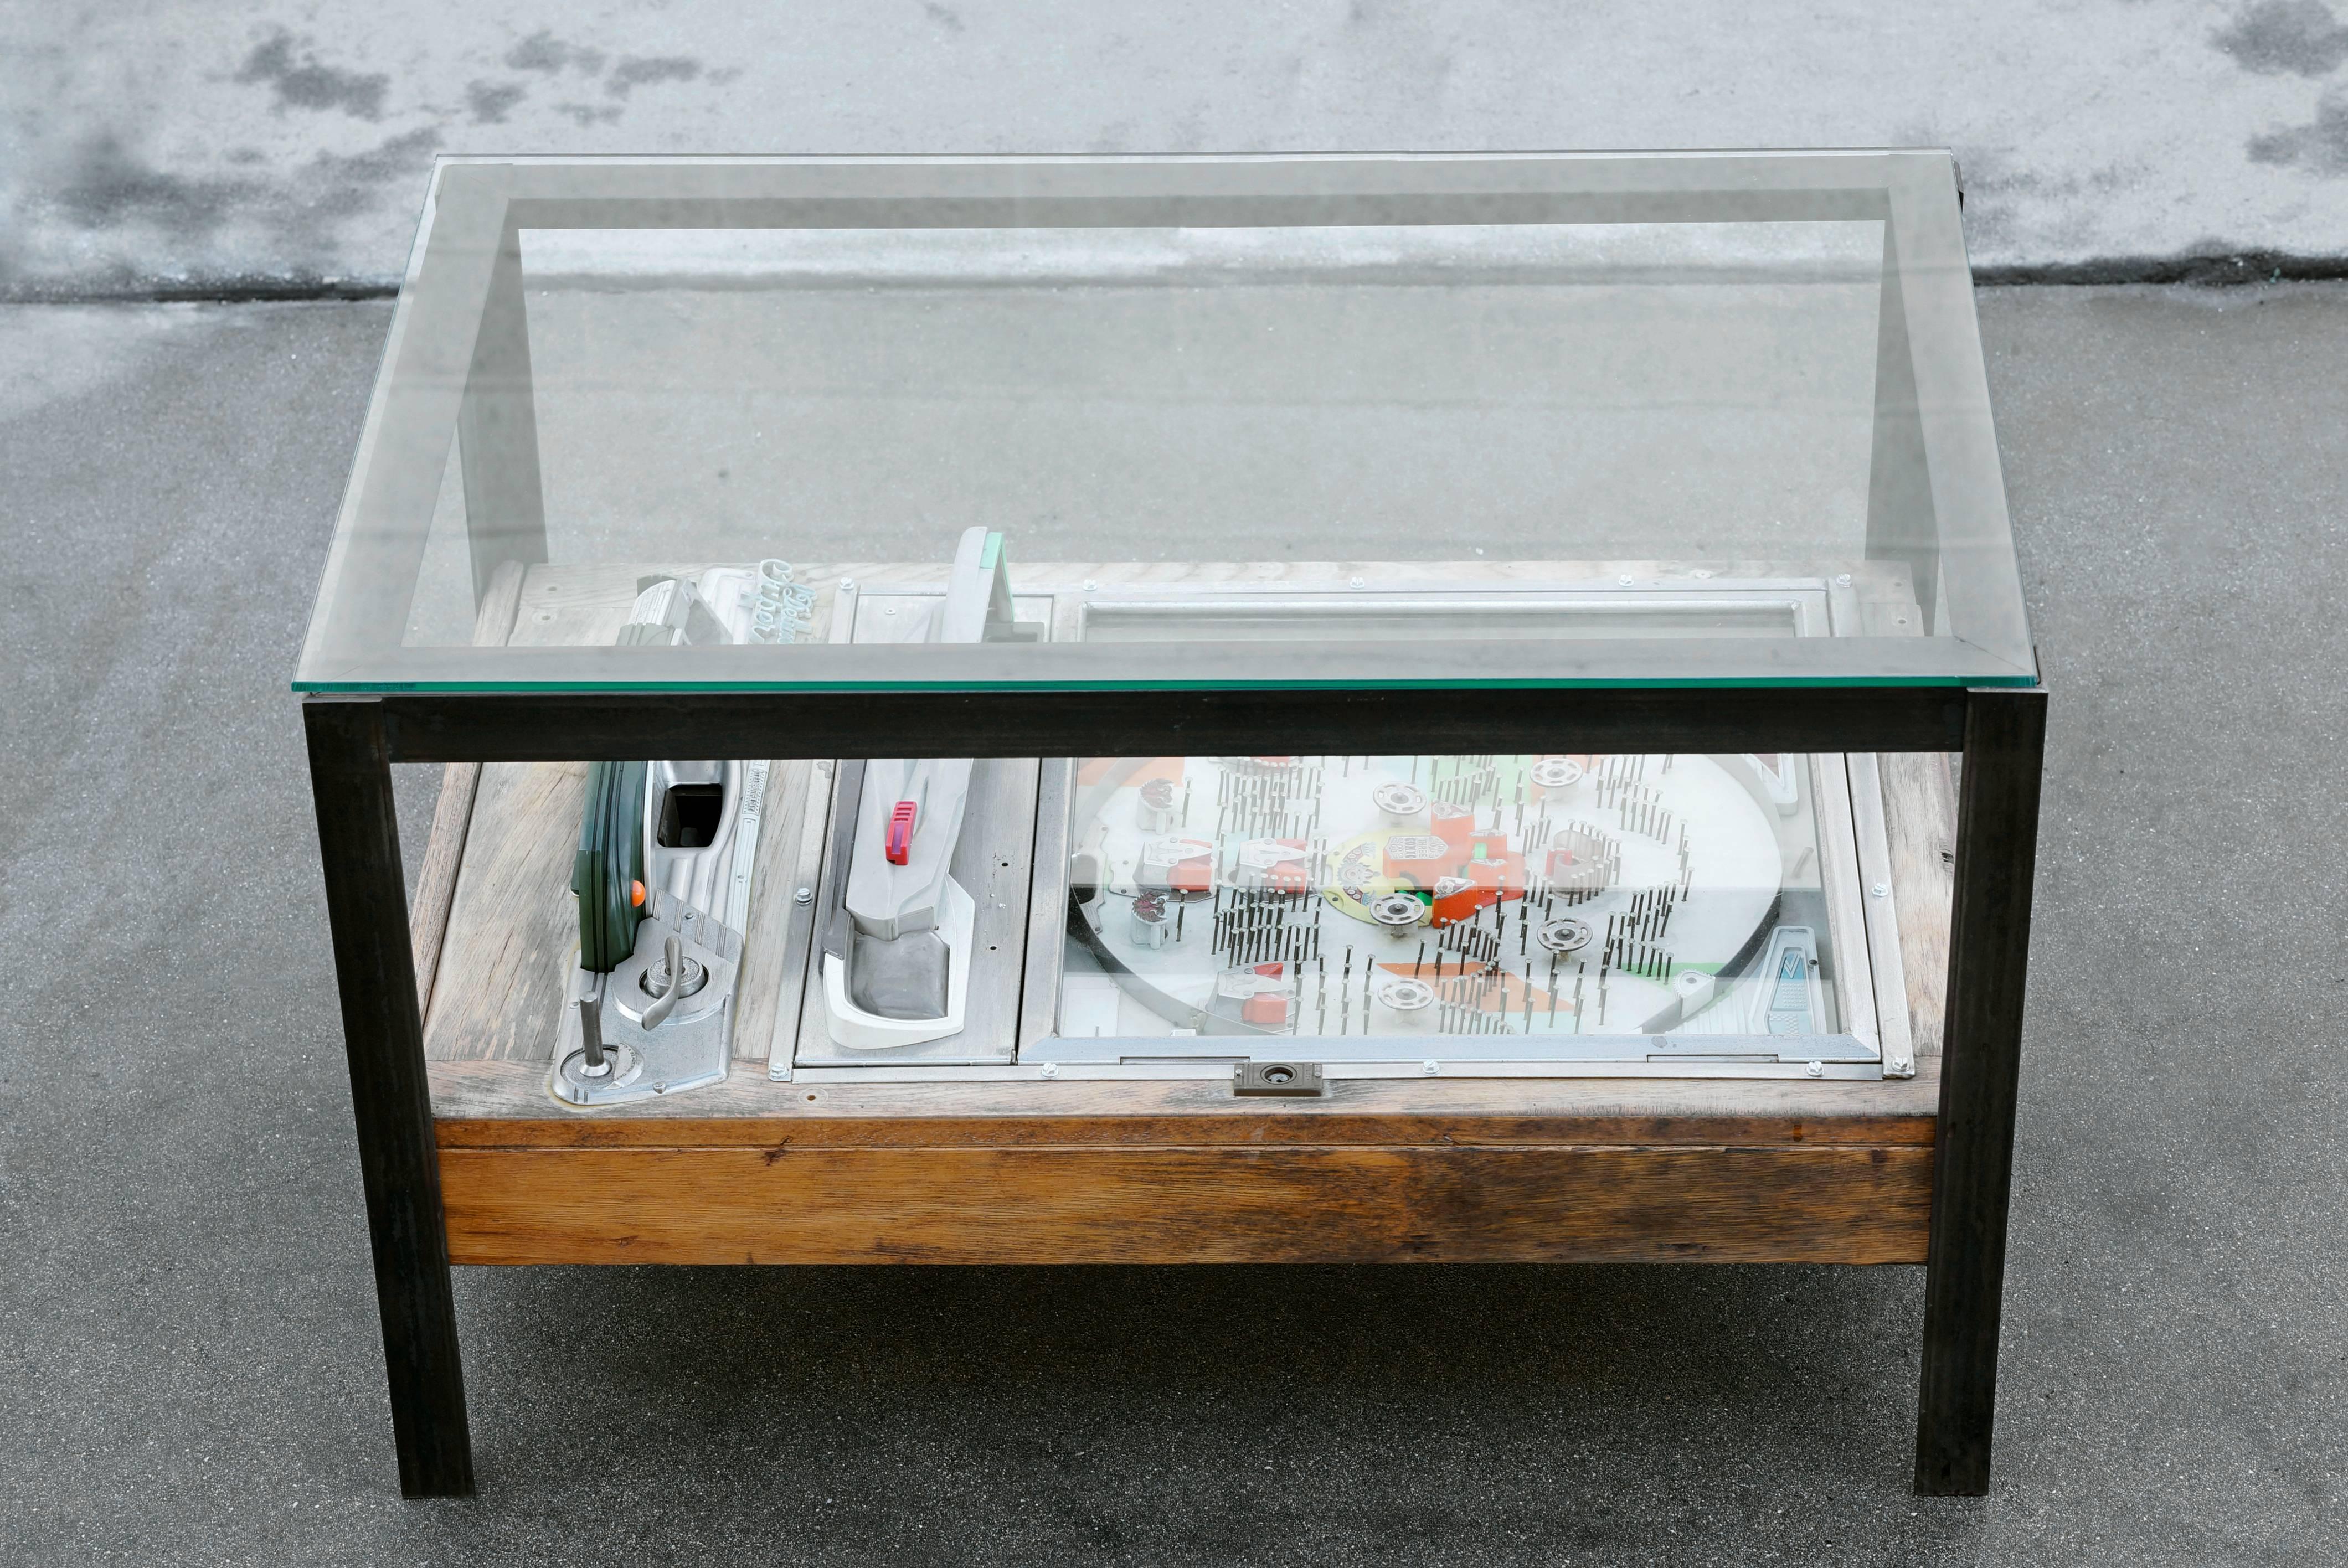 Our unique coffee table combines a vintage Japanese Pachinko arcade game in a custom-made steel frame with a tempered glass top. Pachinko is a mechanical game originating in Japan; like pinball machines, Pachinko boards have a fantastic retro vibe.